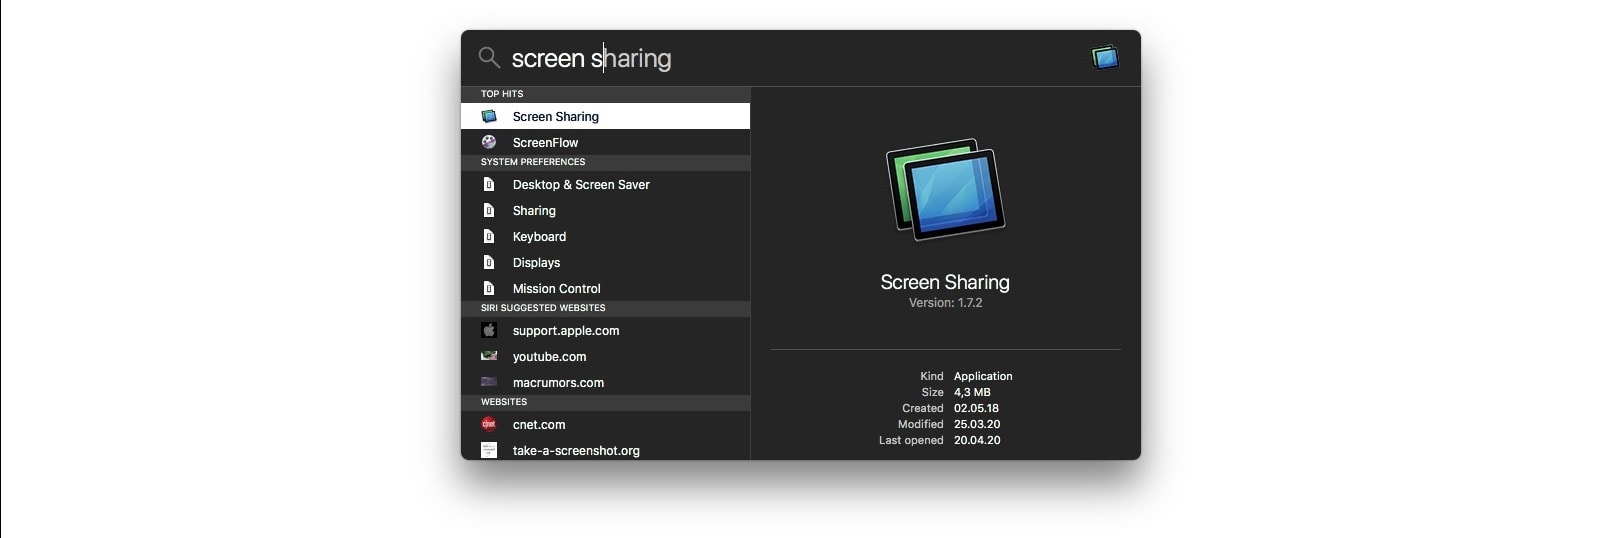 Use Spotlight to open the Screen Sharing application on your Mac. 